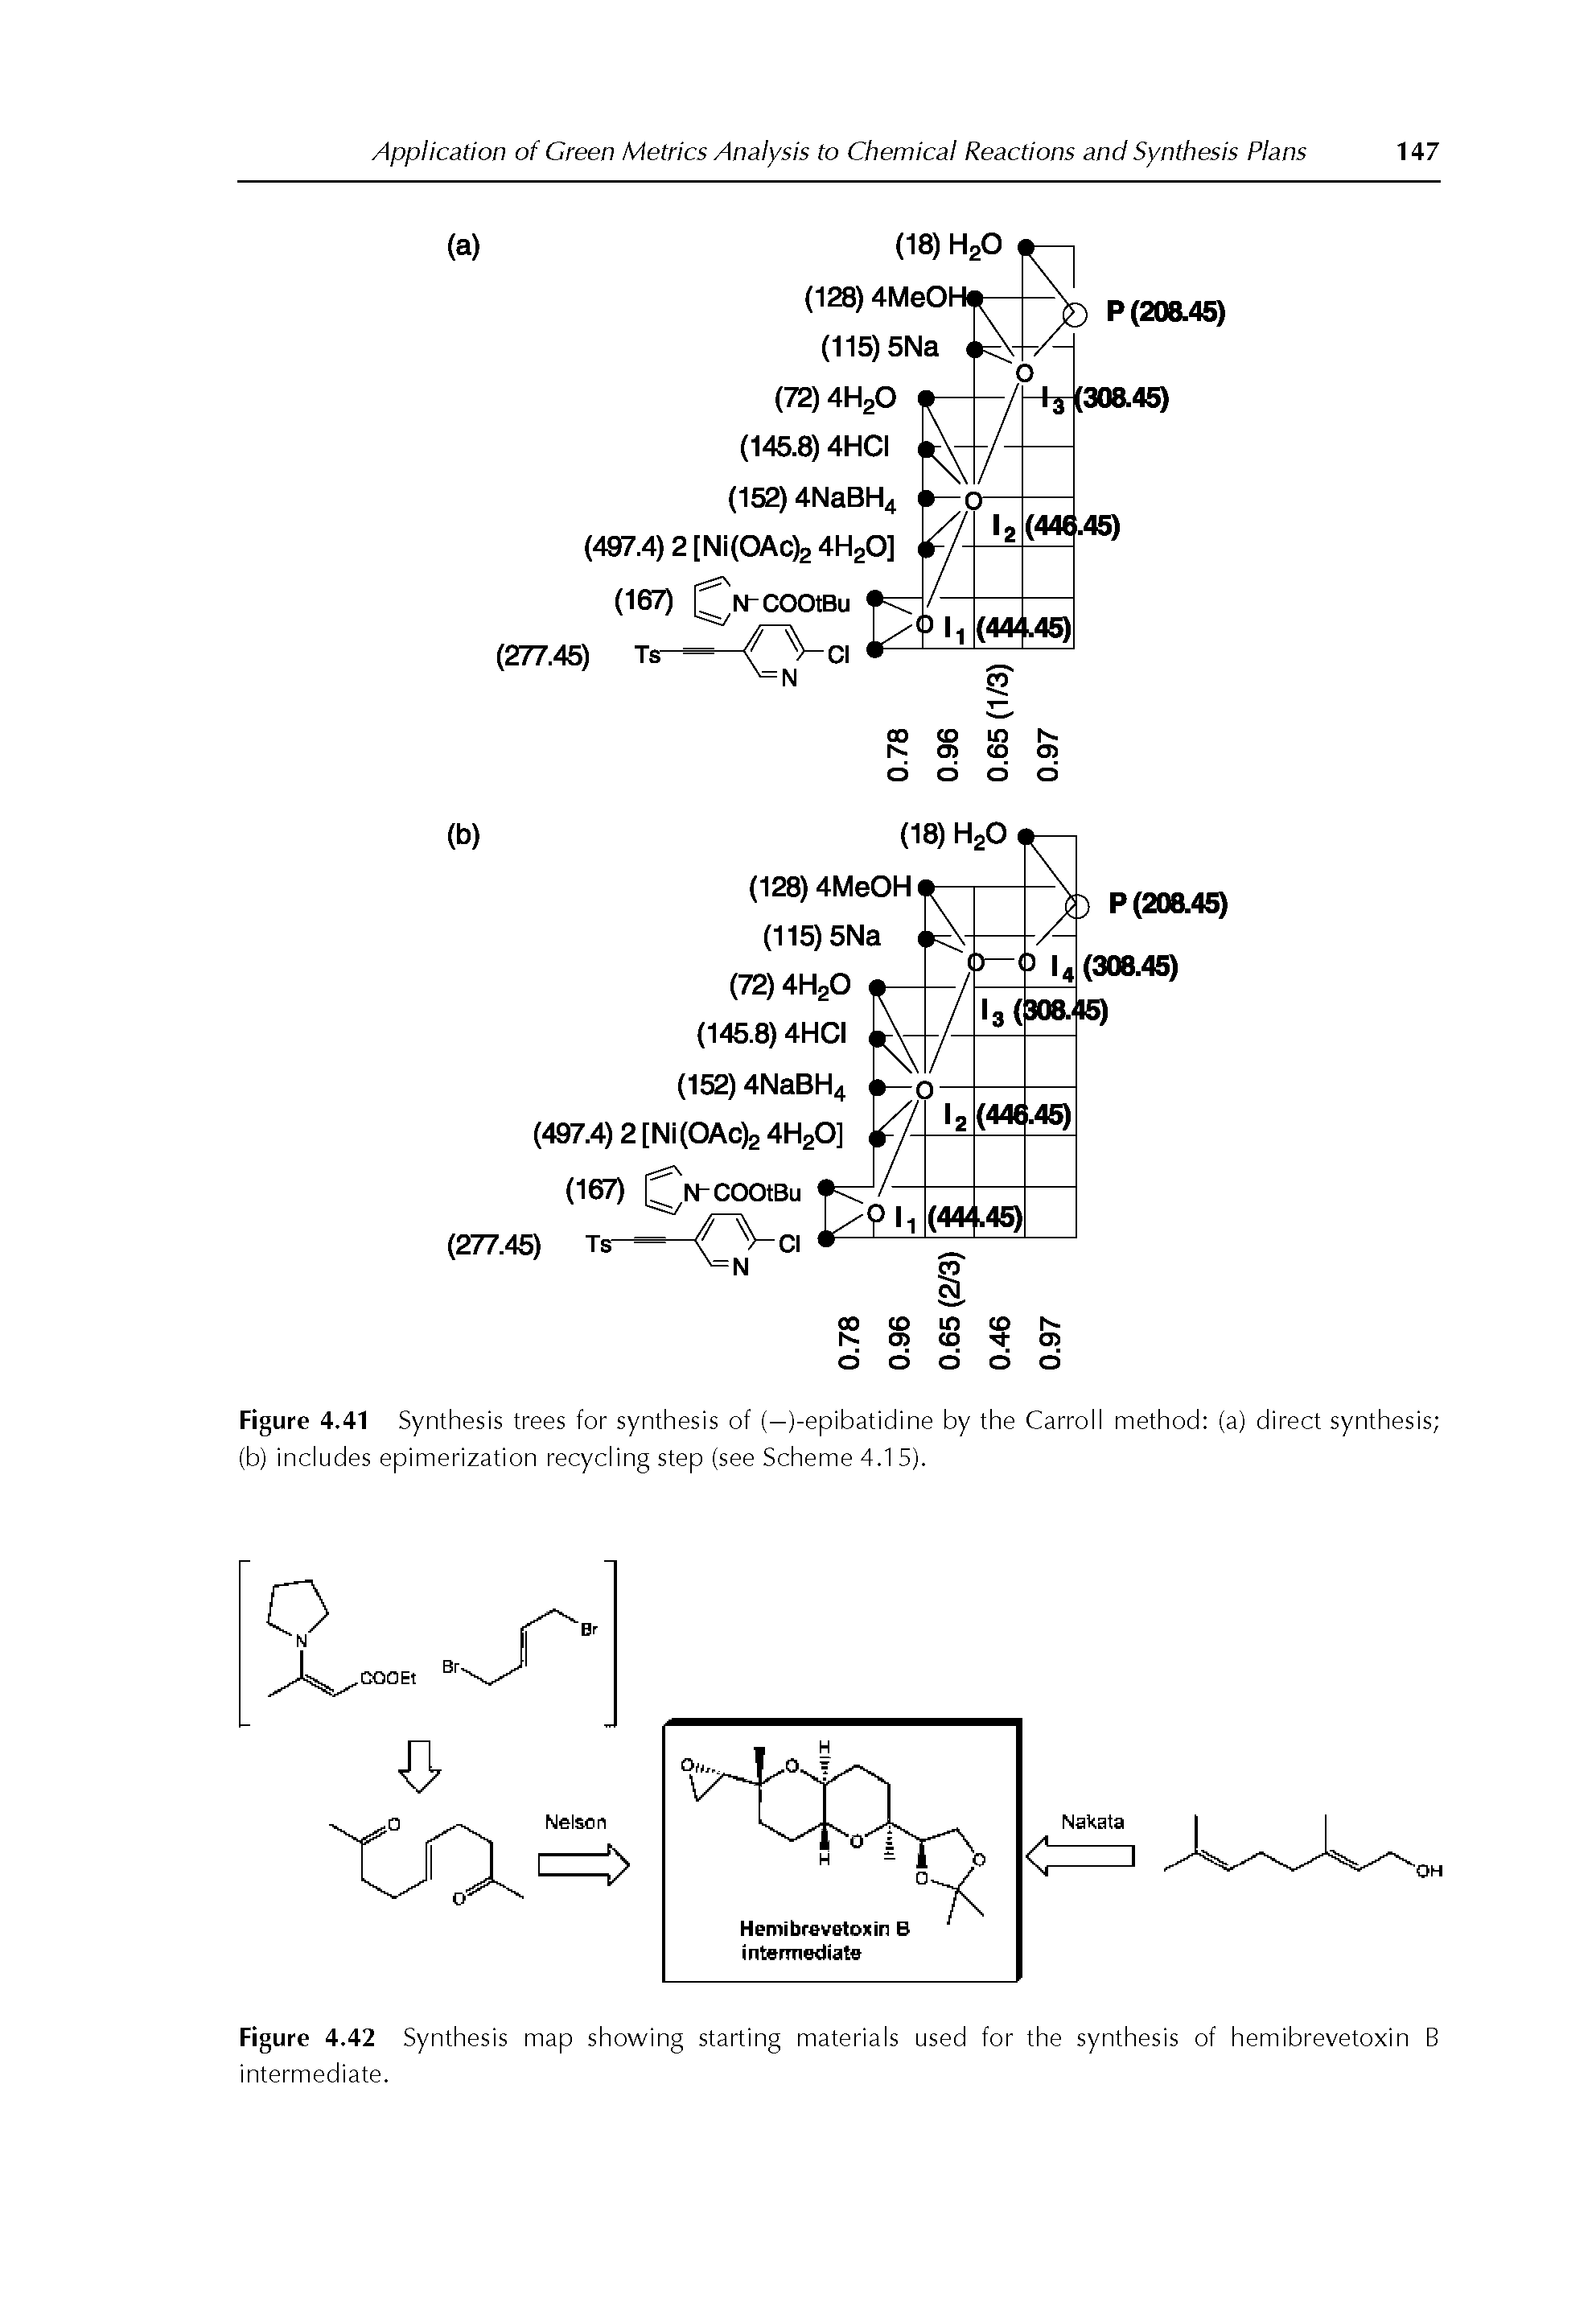 Figure 4.41 Synthesis trees for synthesis of (—)-epibatidine by the Carroll method (a) direct synthesis (b) includes epimerization recycling step (see Scheme 4.1 5).